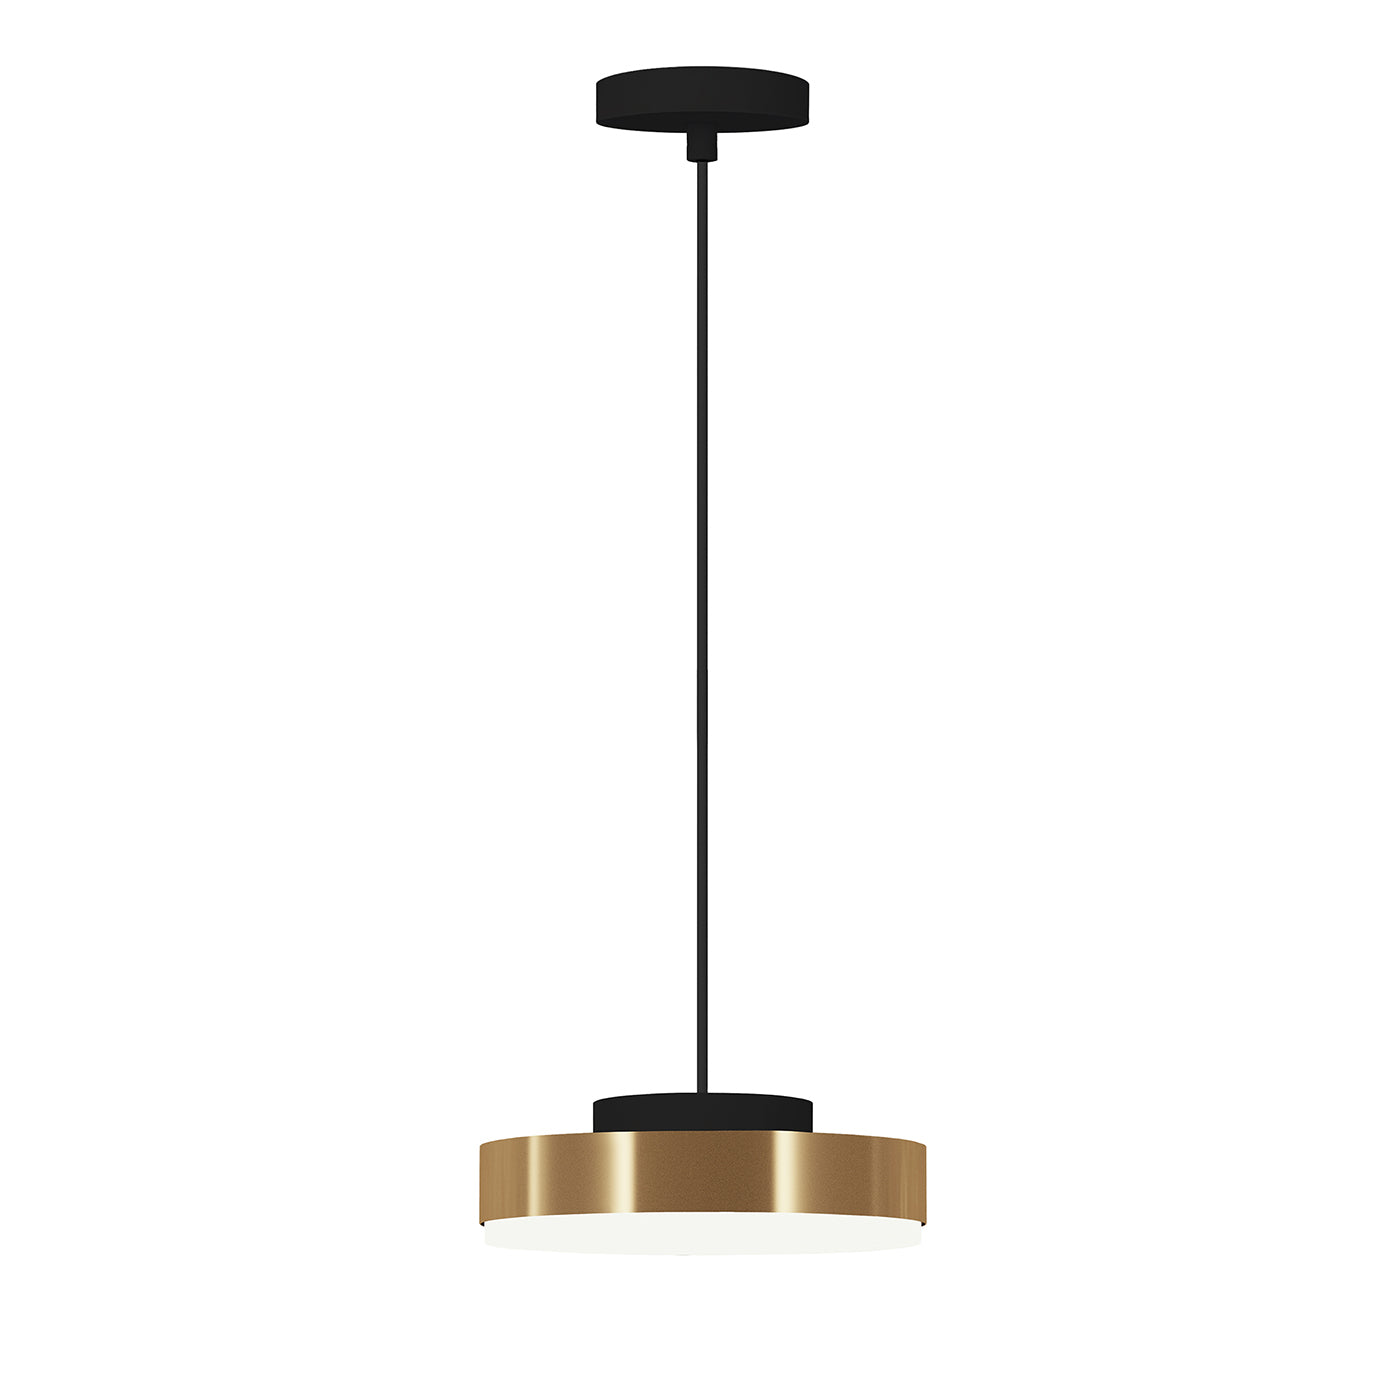 Discus SO Small Brass & Black Pendant Lamp by MKV Design - Main view